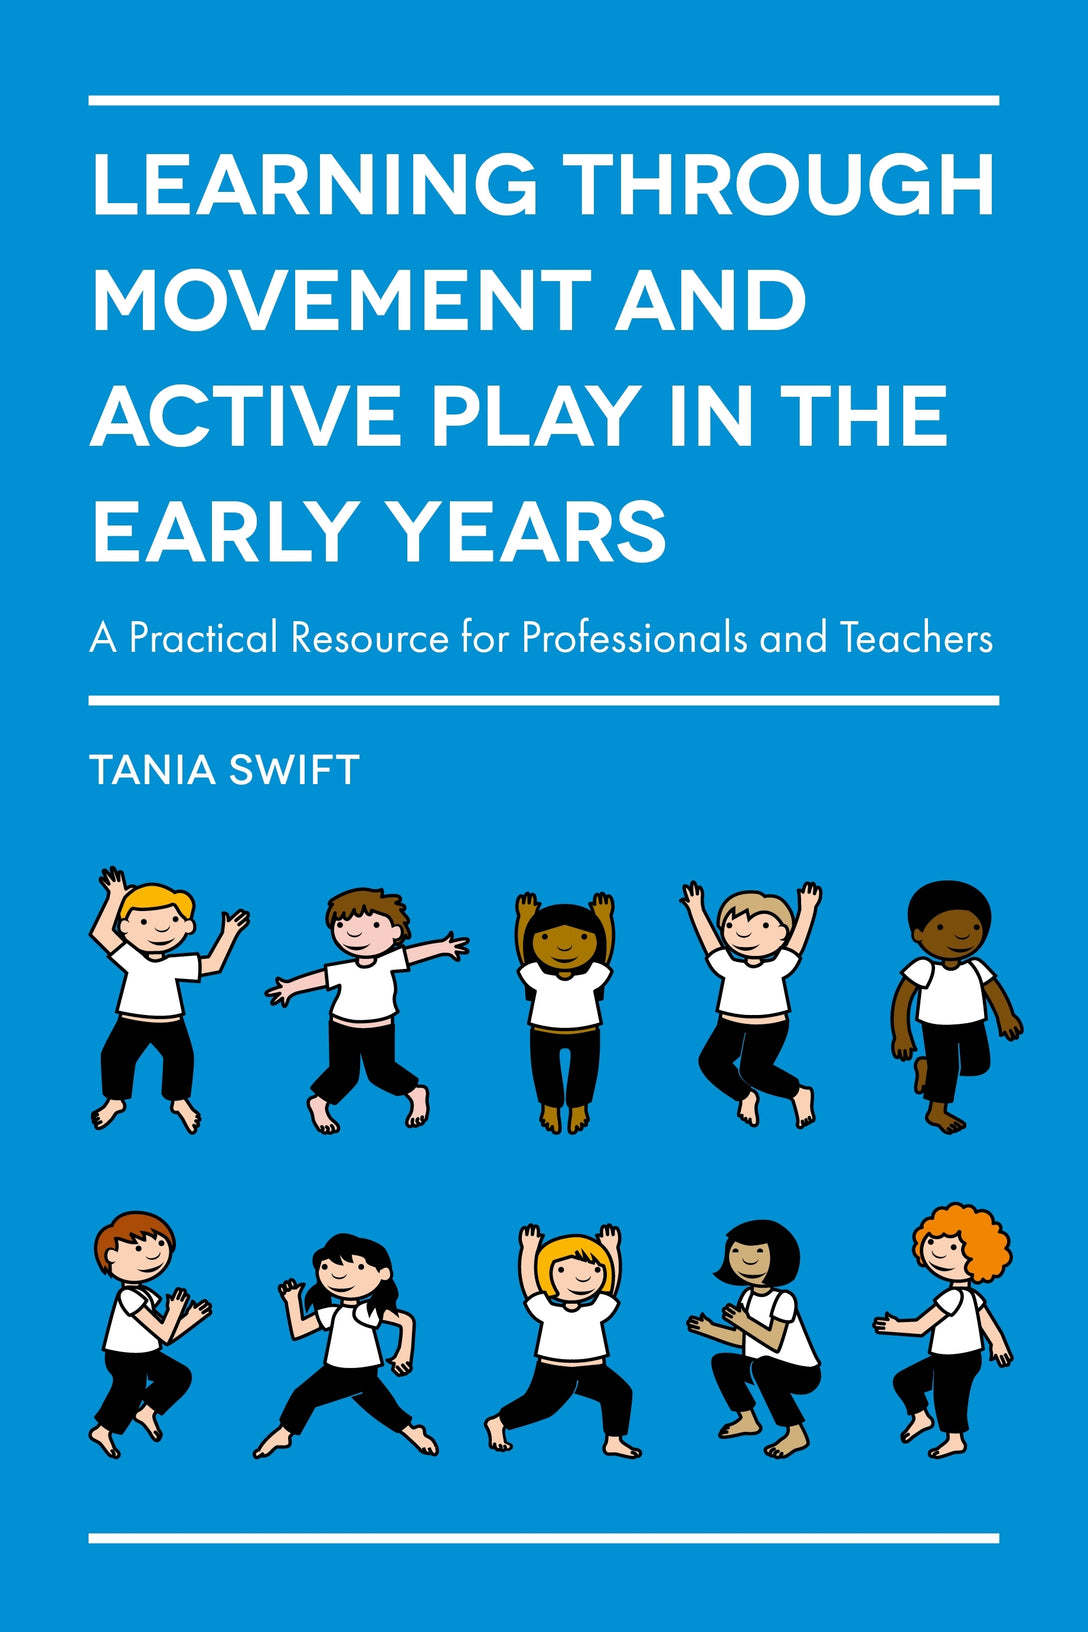 Learning through Movement and Active Play in the Early Years by Tania Swift